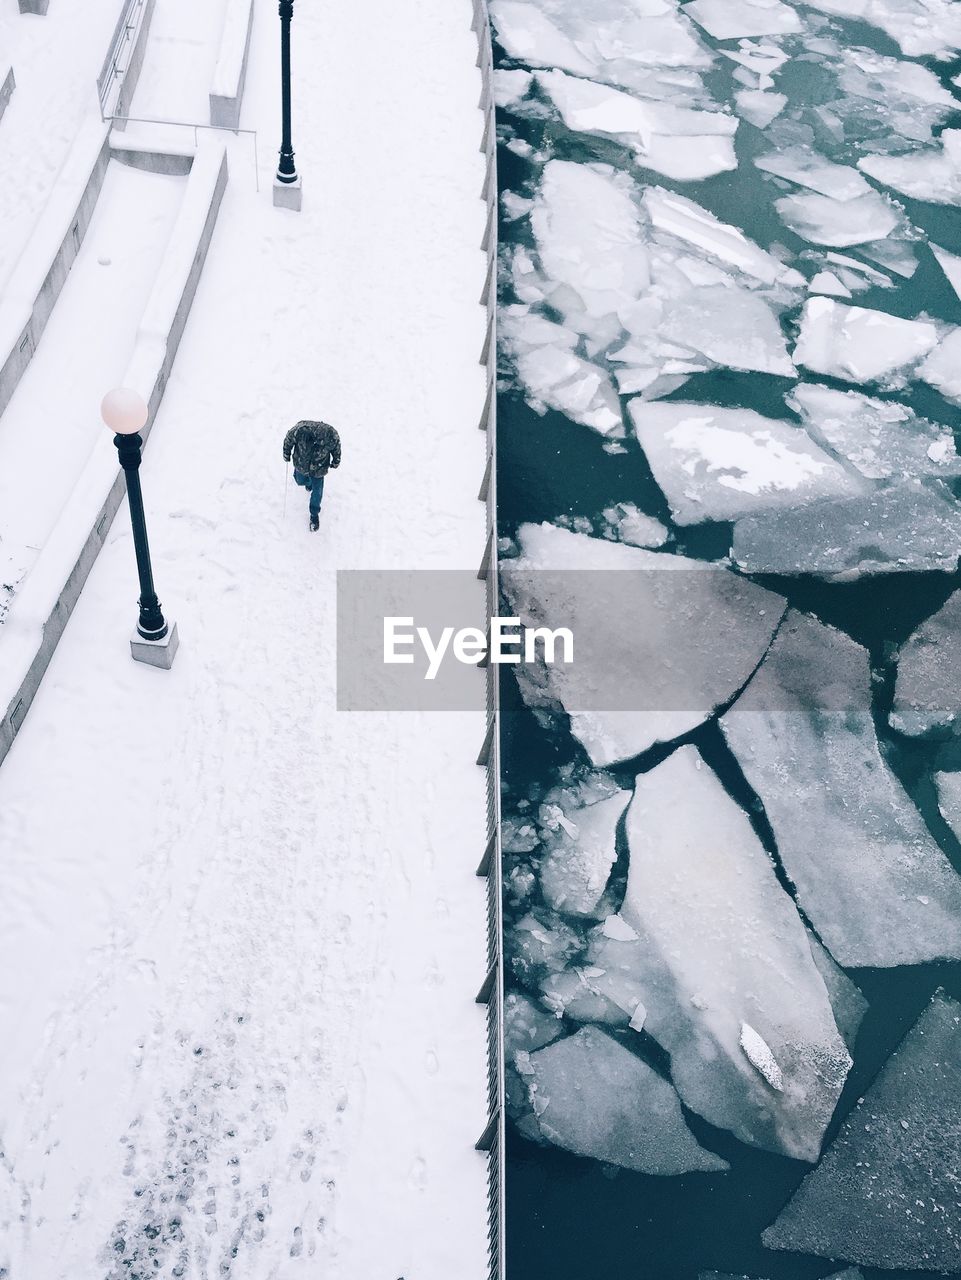 High angle view of man walking on snow covered pathway by icebergs in river